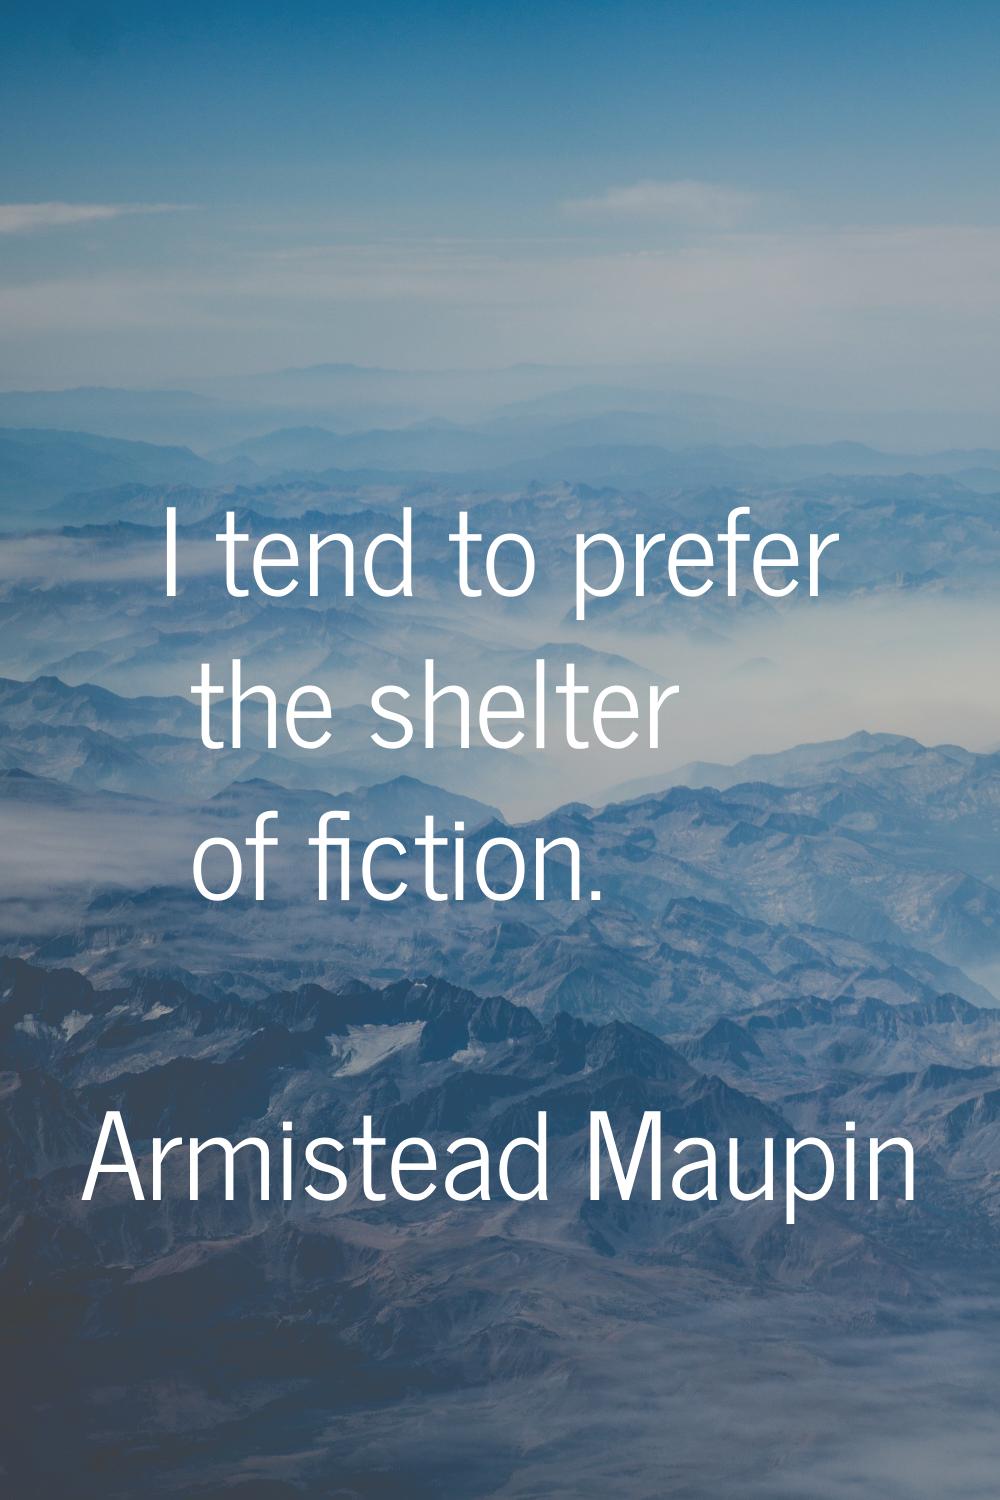 I tend to prefer the shelter of fiction.